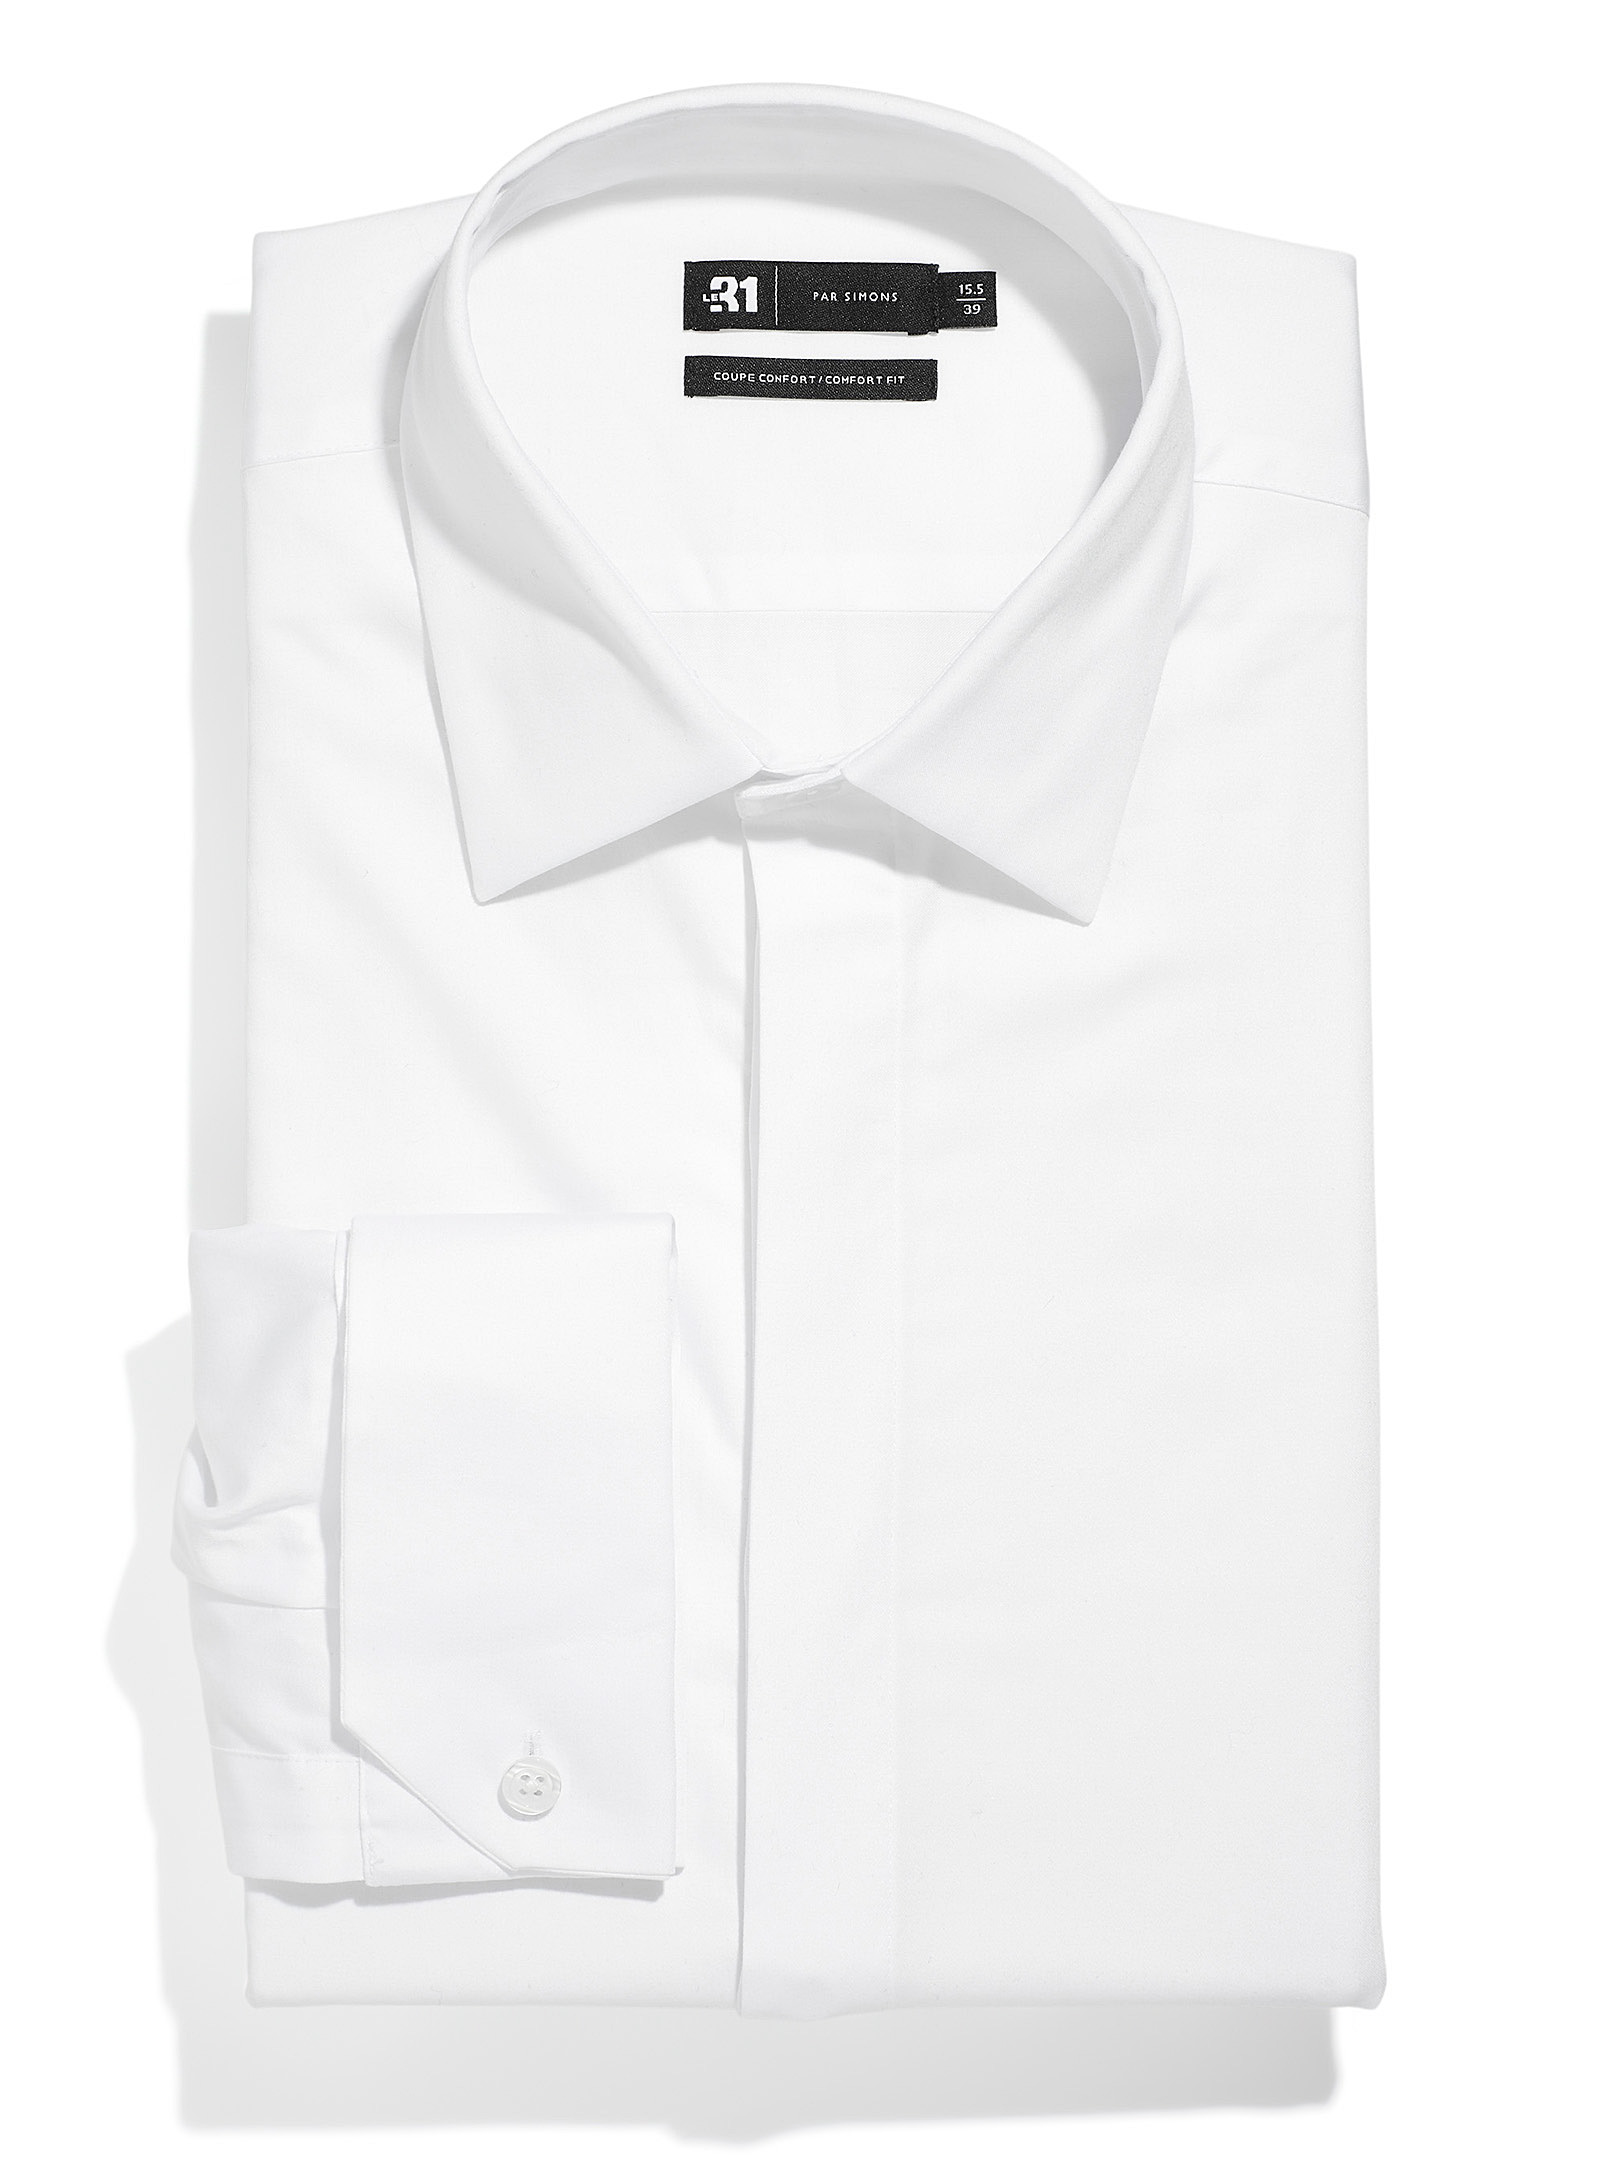 Le 31 French Cuff White Shirt Comfort Fit